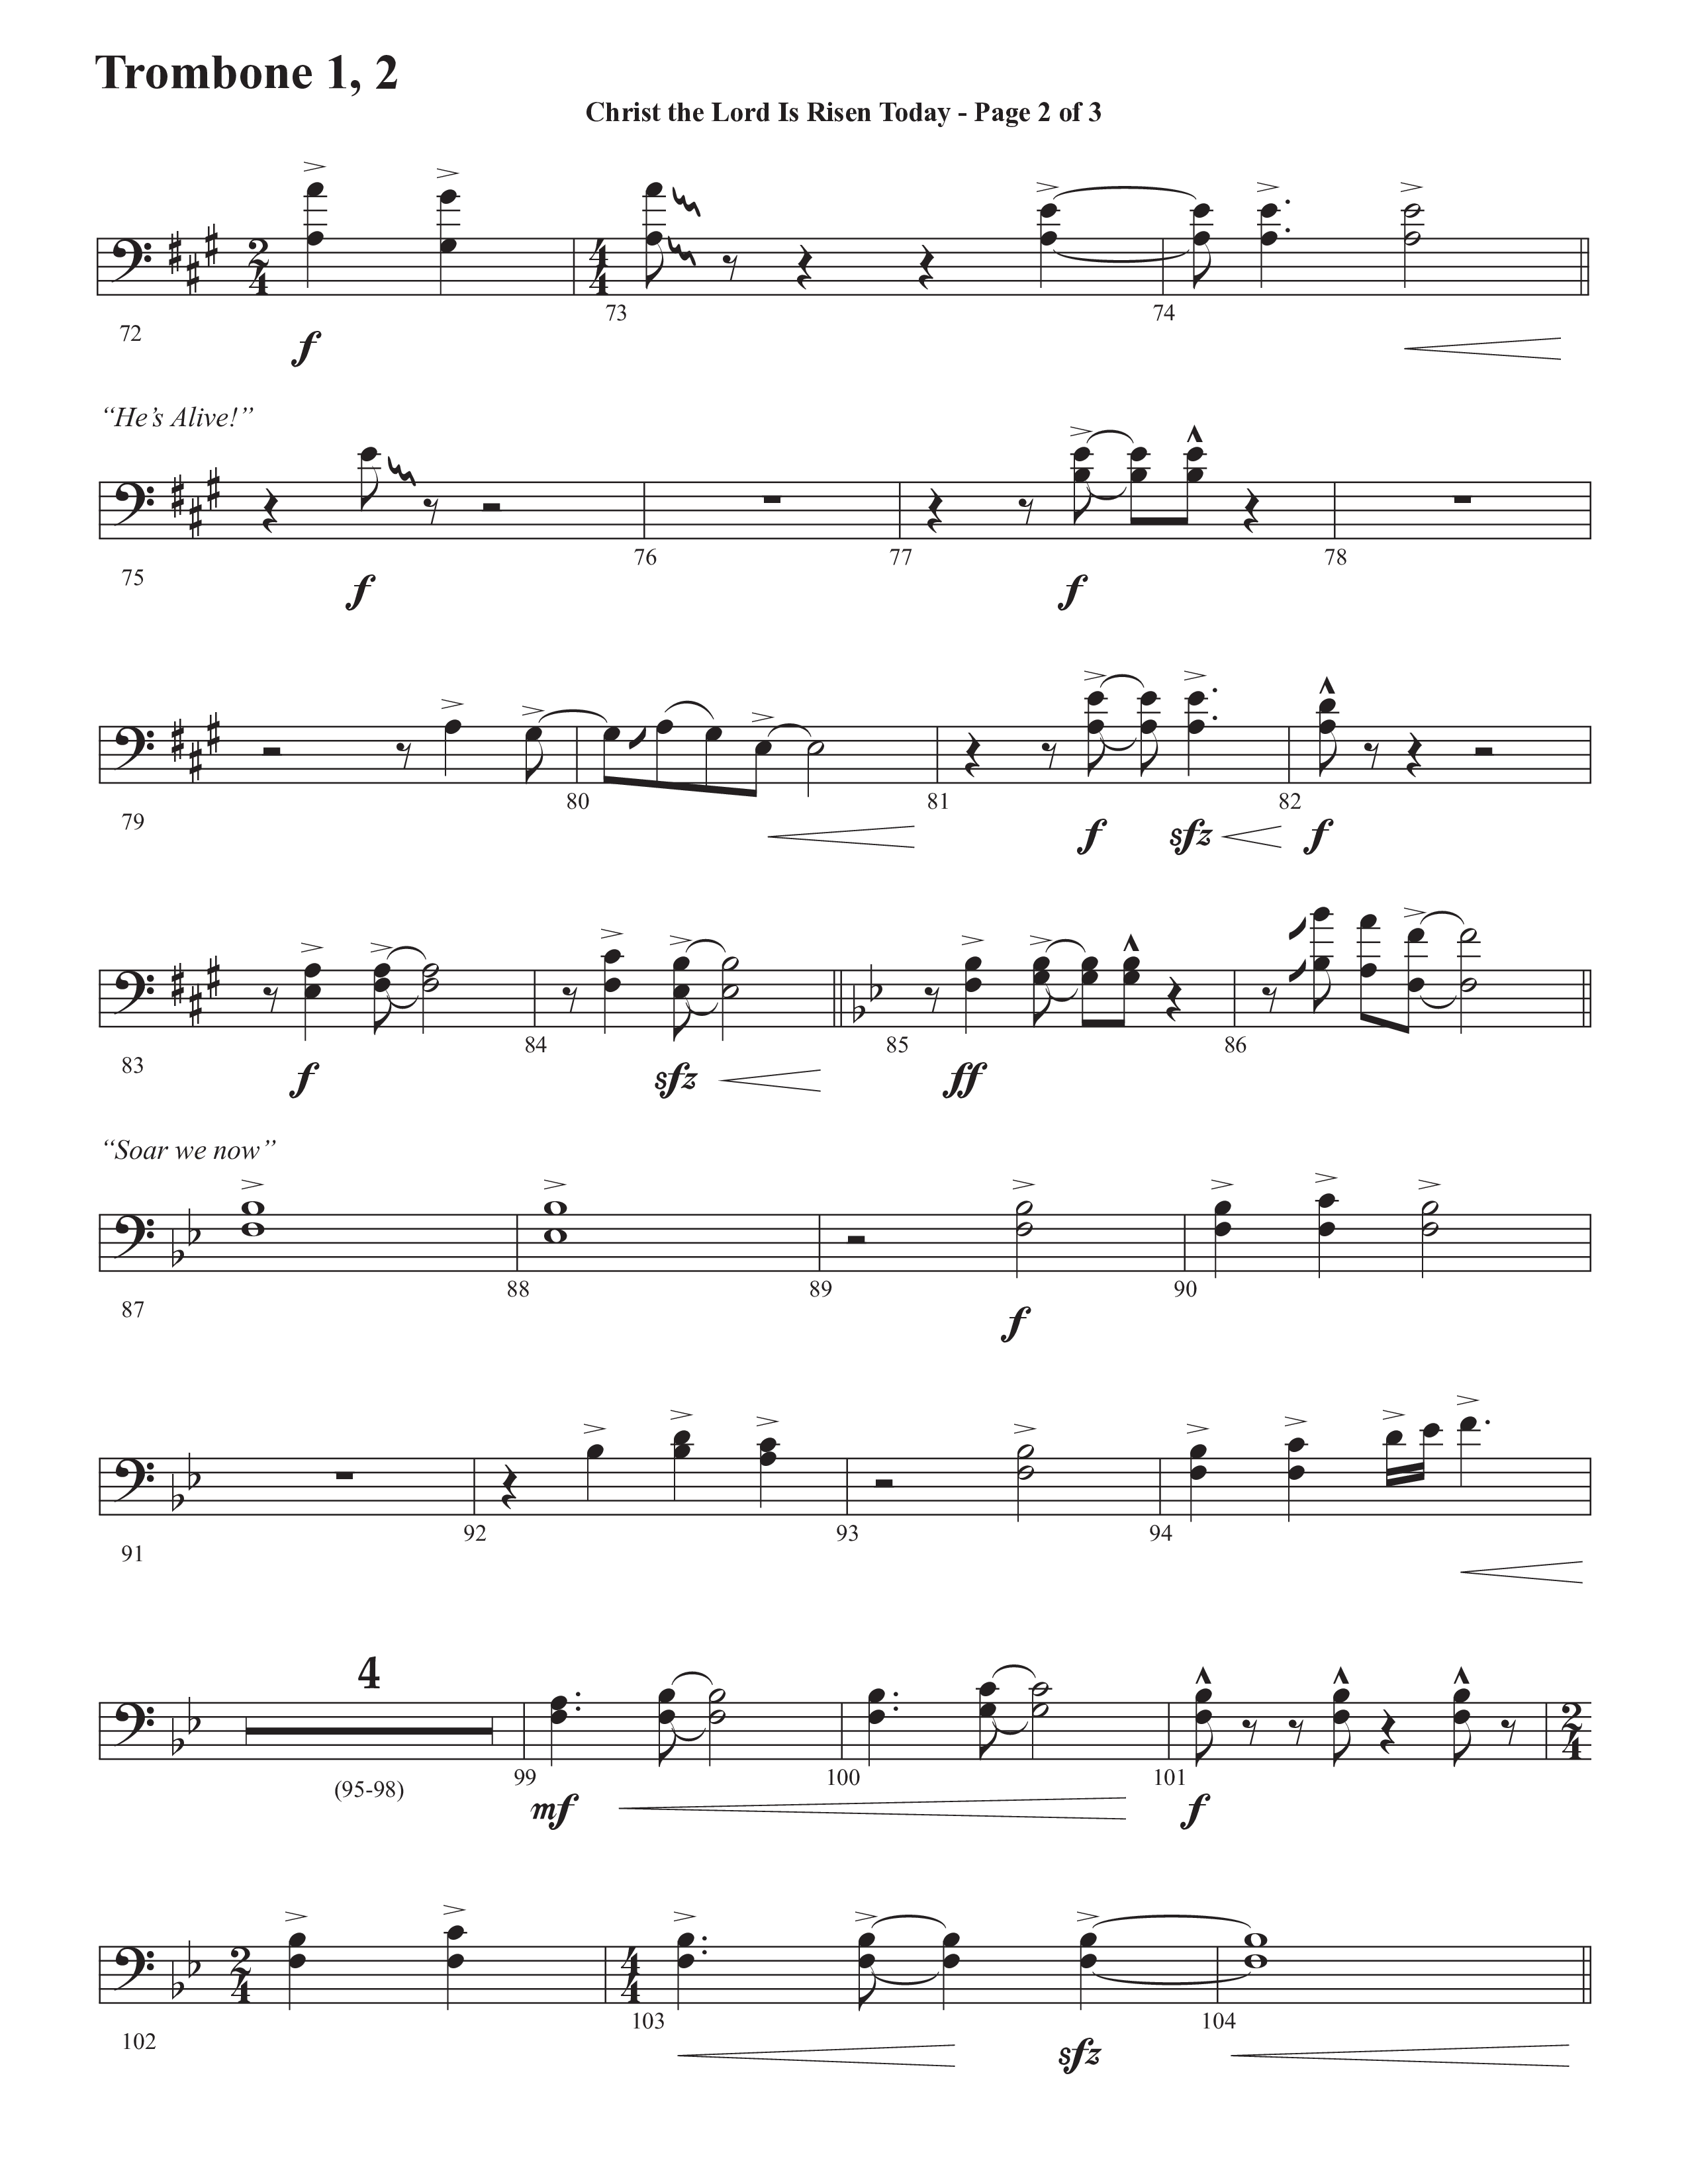 Christ The Lord Is Risen Today (He's Alive) (Choral Anthem SATB) Trombone 1/2 (Semsen Music / Arr. John Bolin / Orch. Cliff Duren)